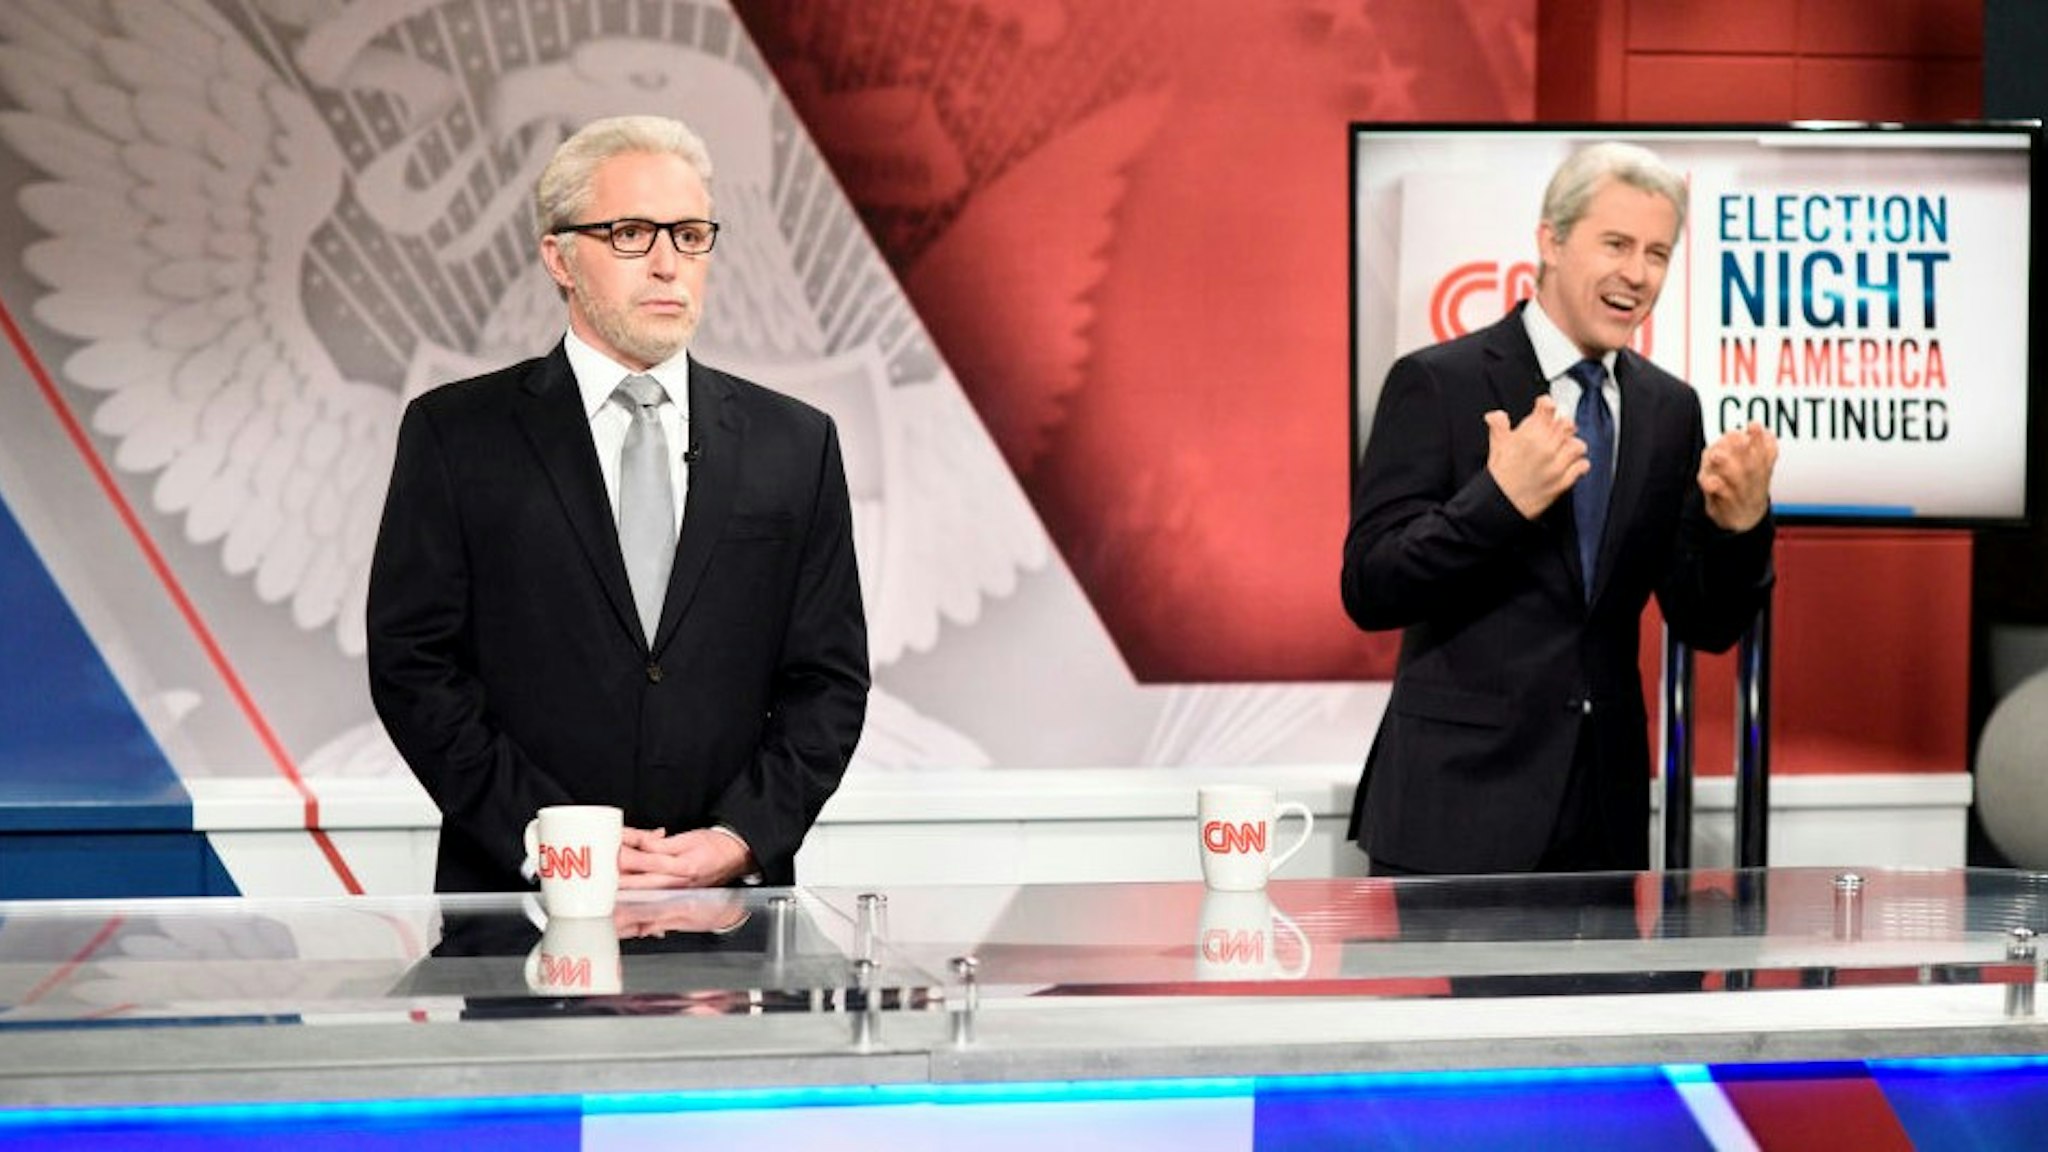 SATURDAY NIGHT LIVE -- "Dave Chappelle" Episode 1791 -- Pictured: (l-r) Beck Bennett as Wolf Blitzer and Alex Moffat as John King during the "Biden Victory" Cold Open on Saturday, November 7, 2020 -- (Photo By: